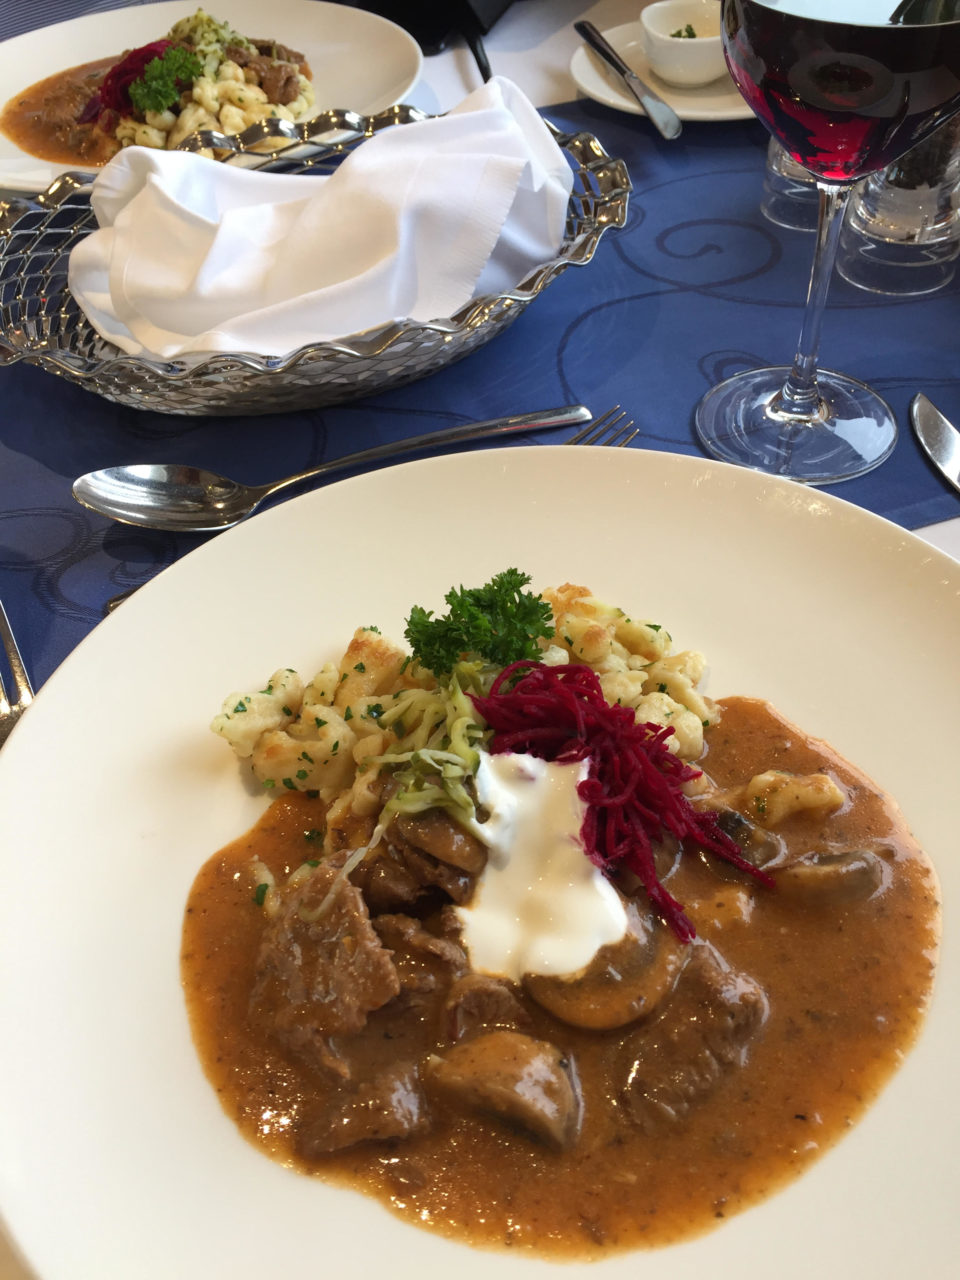 Beef Stroganoff, one of the many Russian specialties served onboard the Viking Akun river cruise ship in Russia